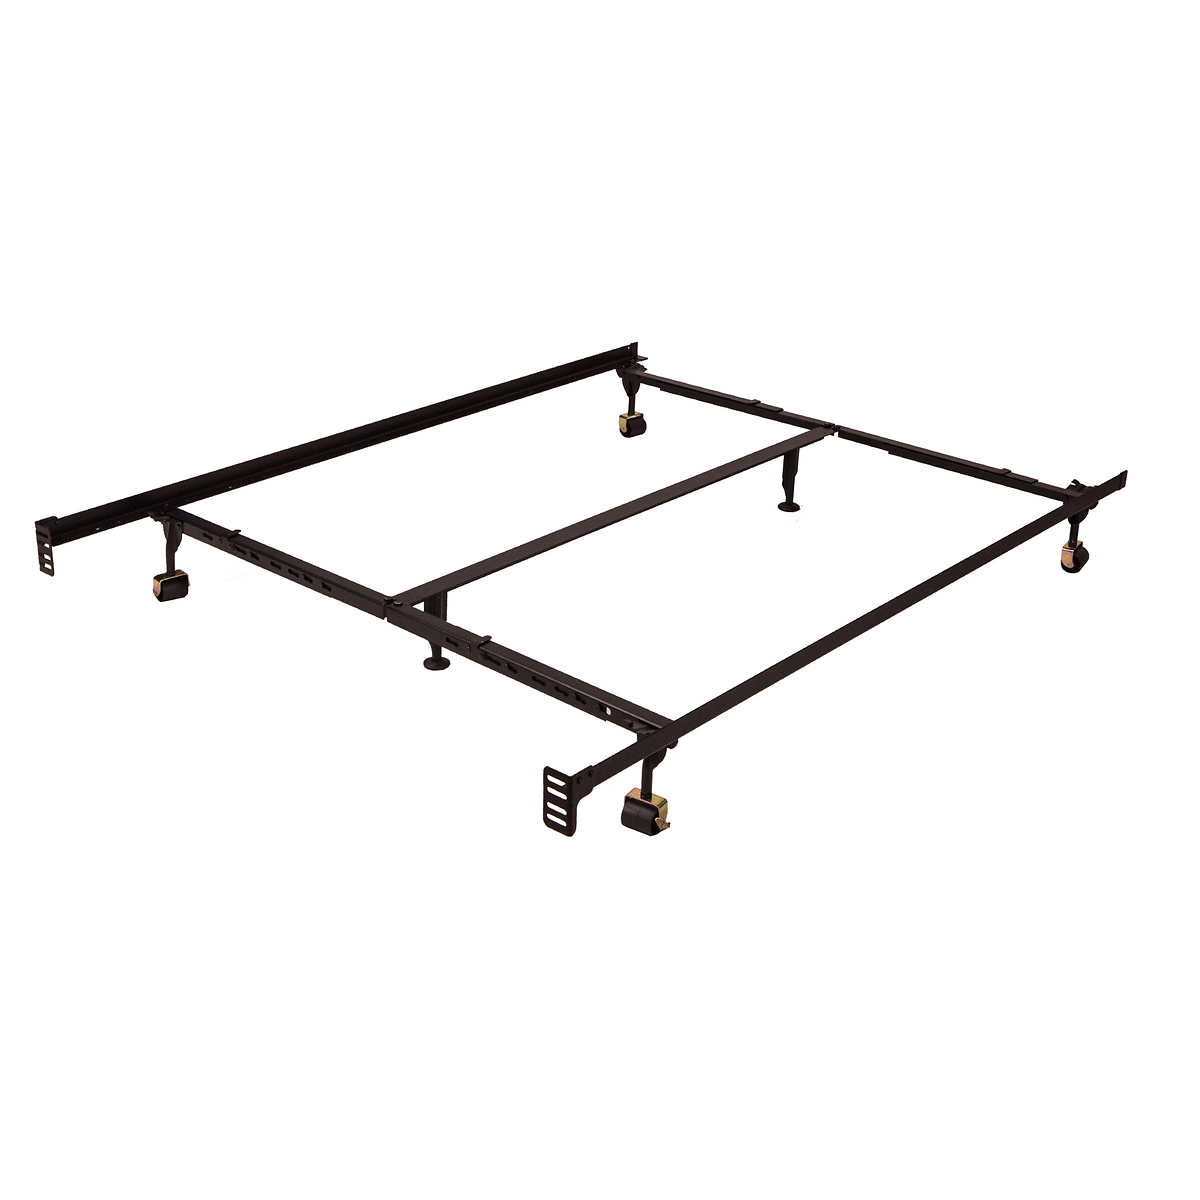 Premium Universal Lev R Lock Bed Frame, King Size Bed Frame Replacement Parts